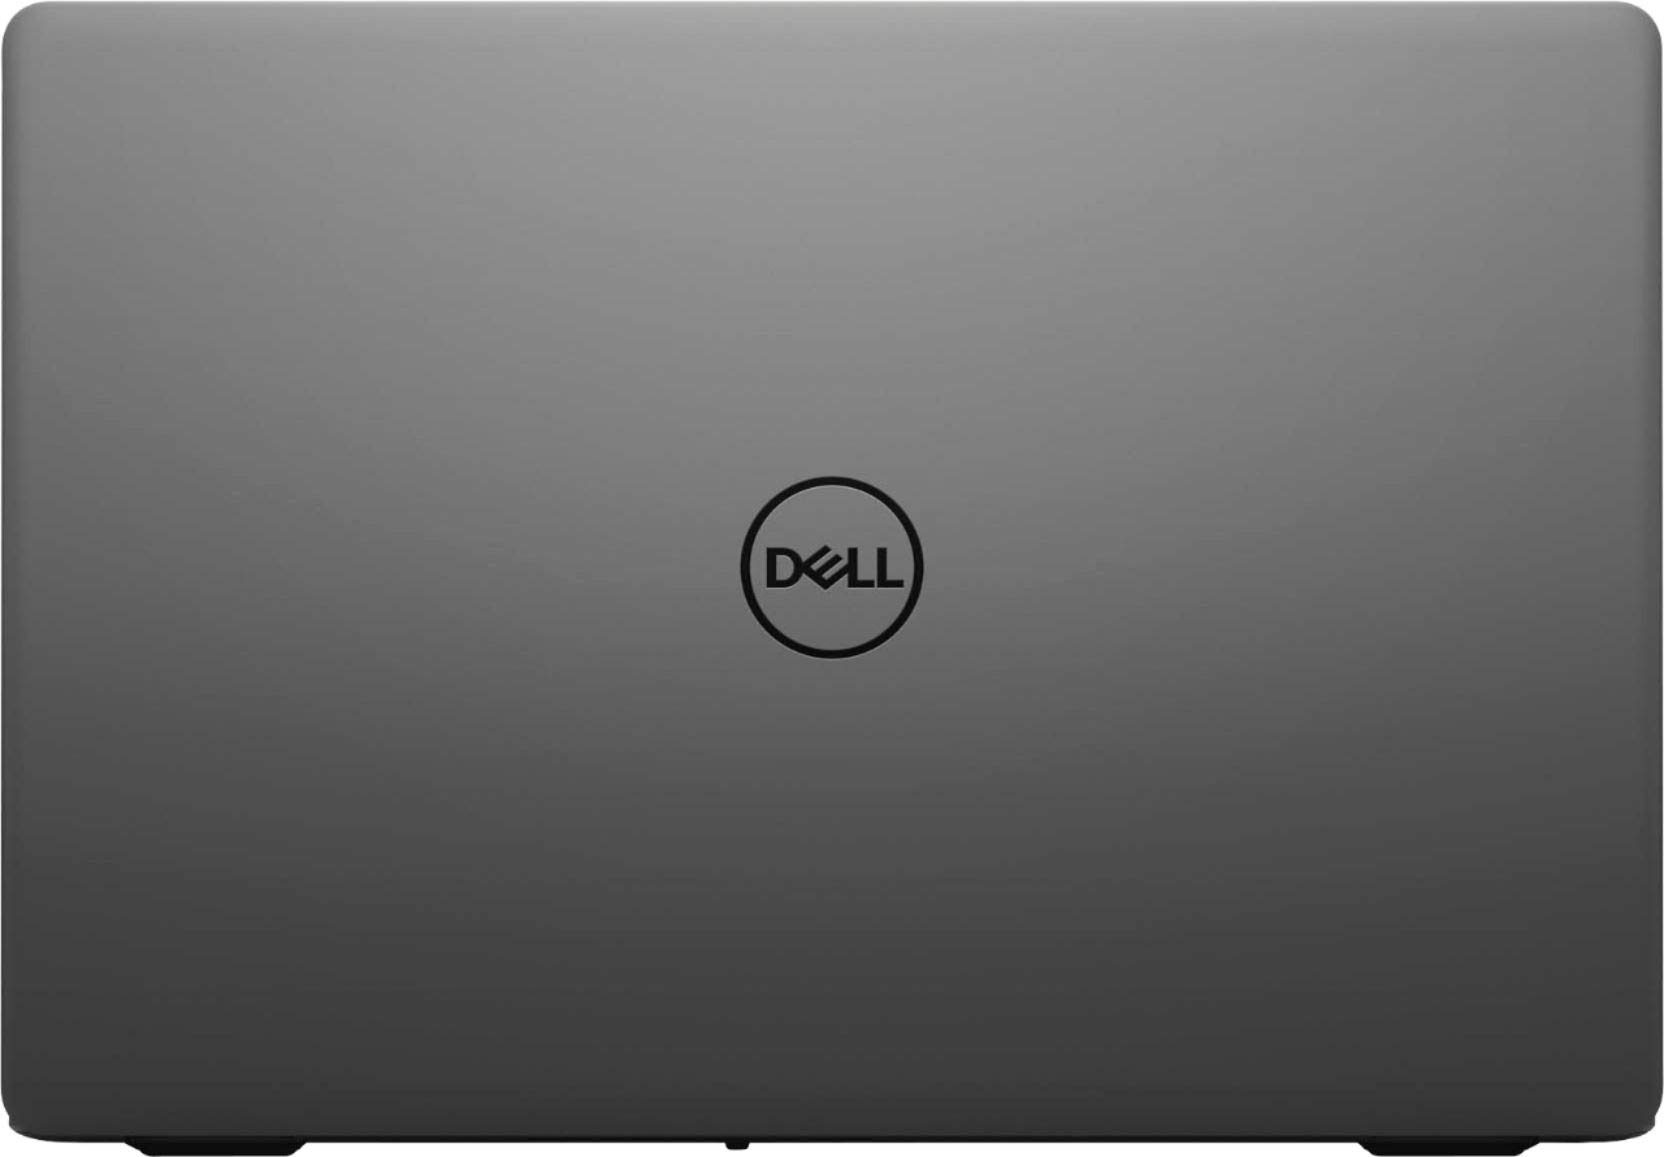 2021 Newest Dell Inspiron 3000 Laptop, 15.6 FHD Touch Display, Intel Core i5-1035G1, 12GB DDR4 RAM, 256GB PCIe SSD + 1TB HDD, Online Meeting Ready, Webcam, WiFi, HDMI, Bluetooth, Win10 Home, Black